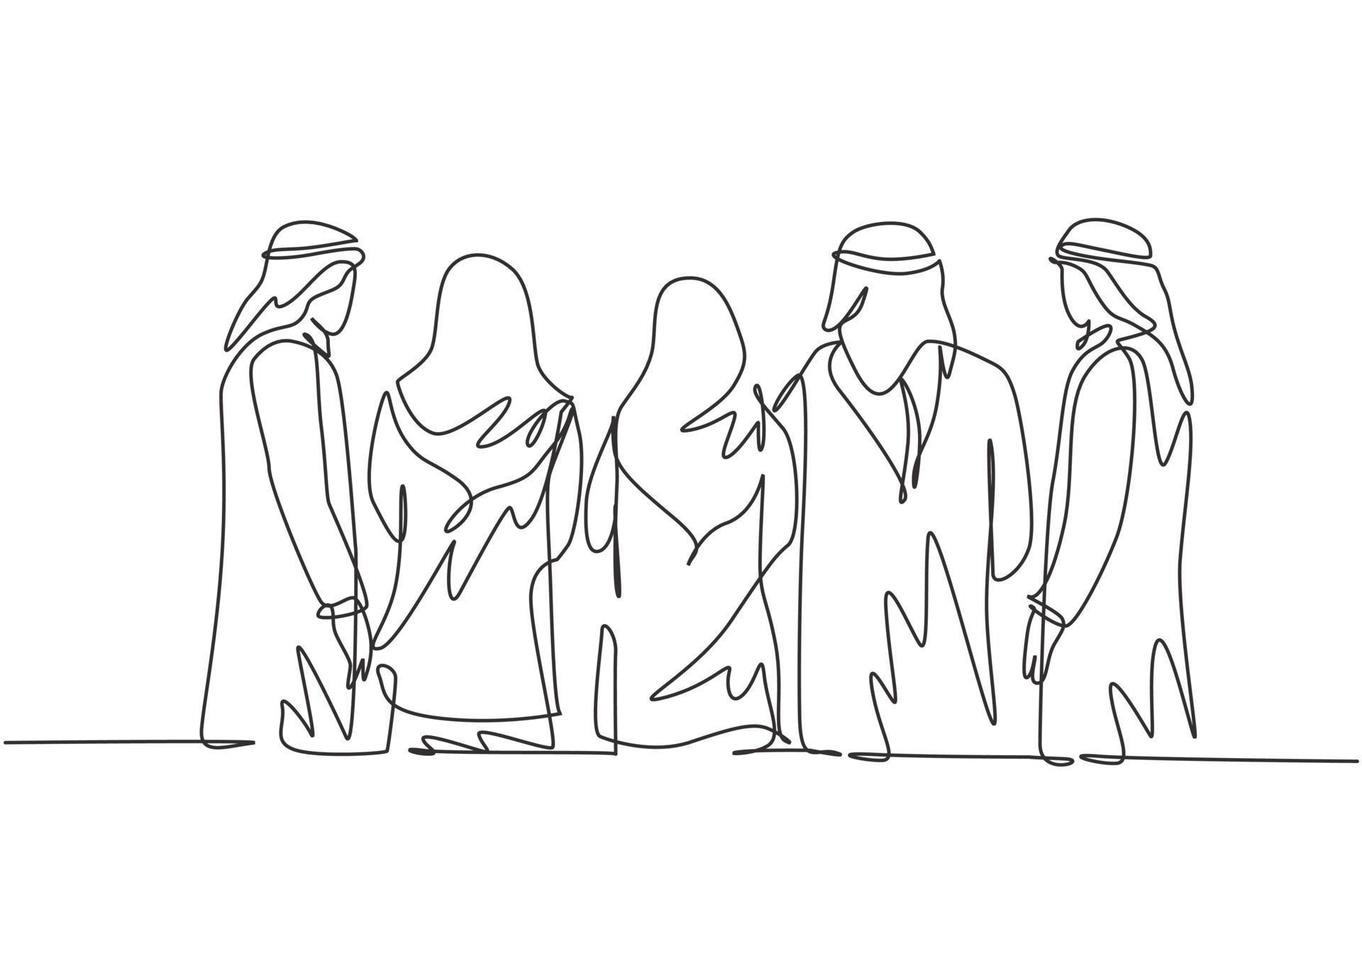 One continuous line drawing group of young muslim businessman and businesspeople standing together from back view. Islamic clothing kandura, scarf, hijab. Single line draw design vectror illustration vector